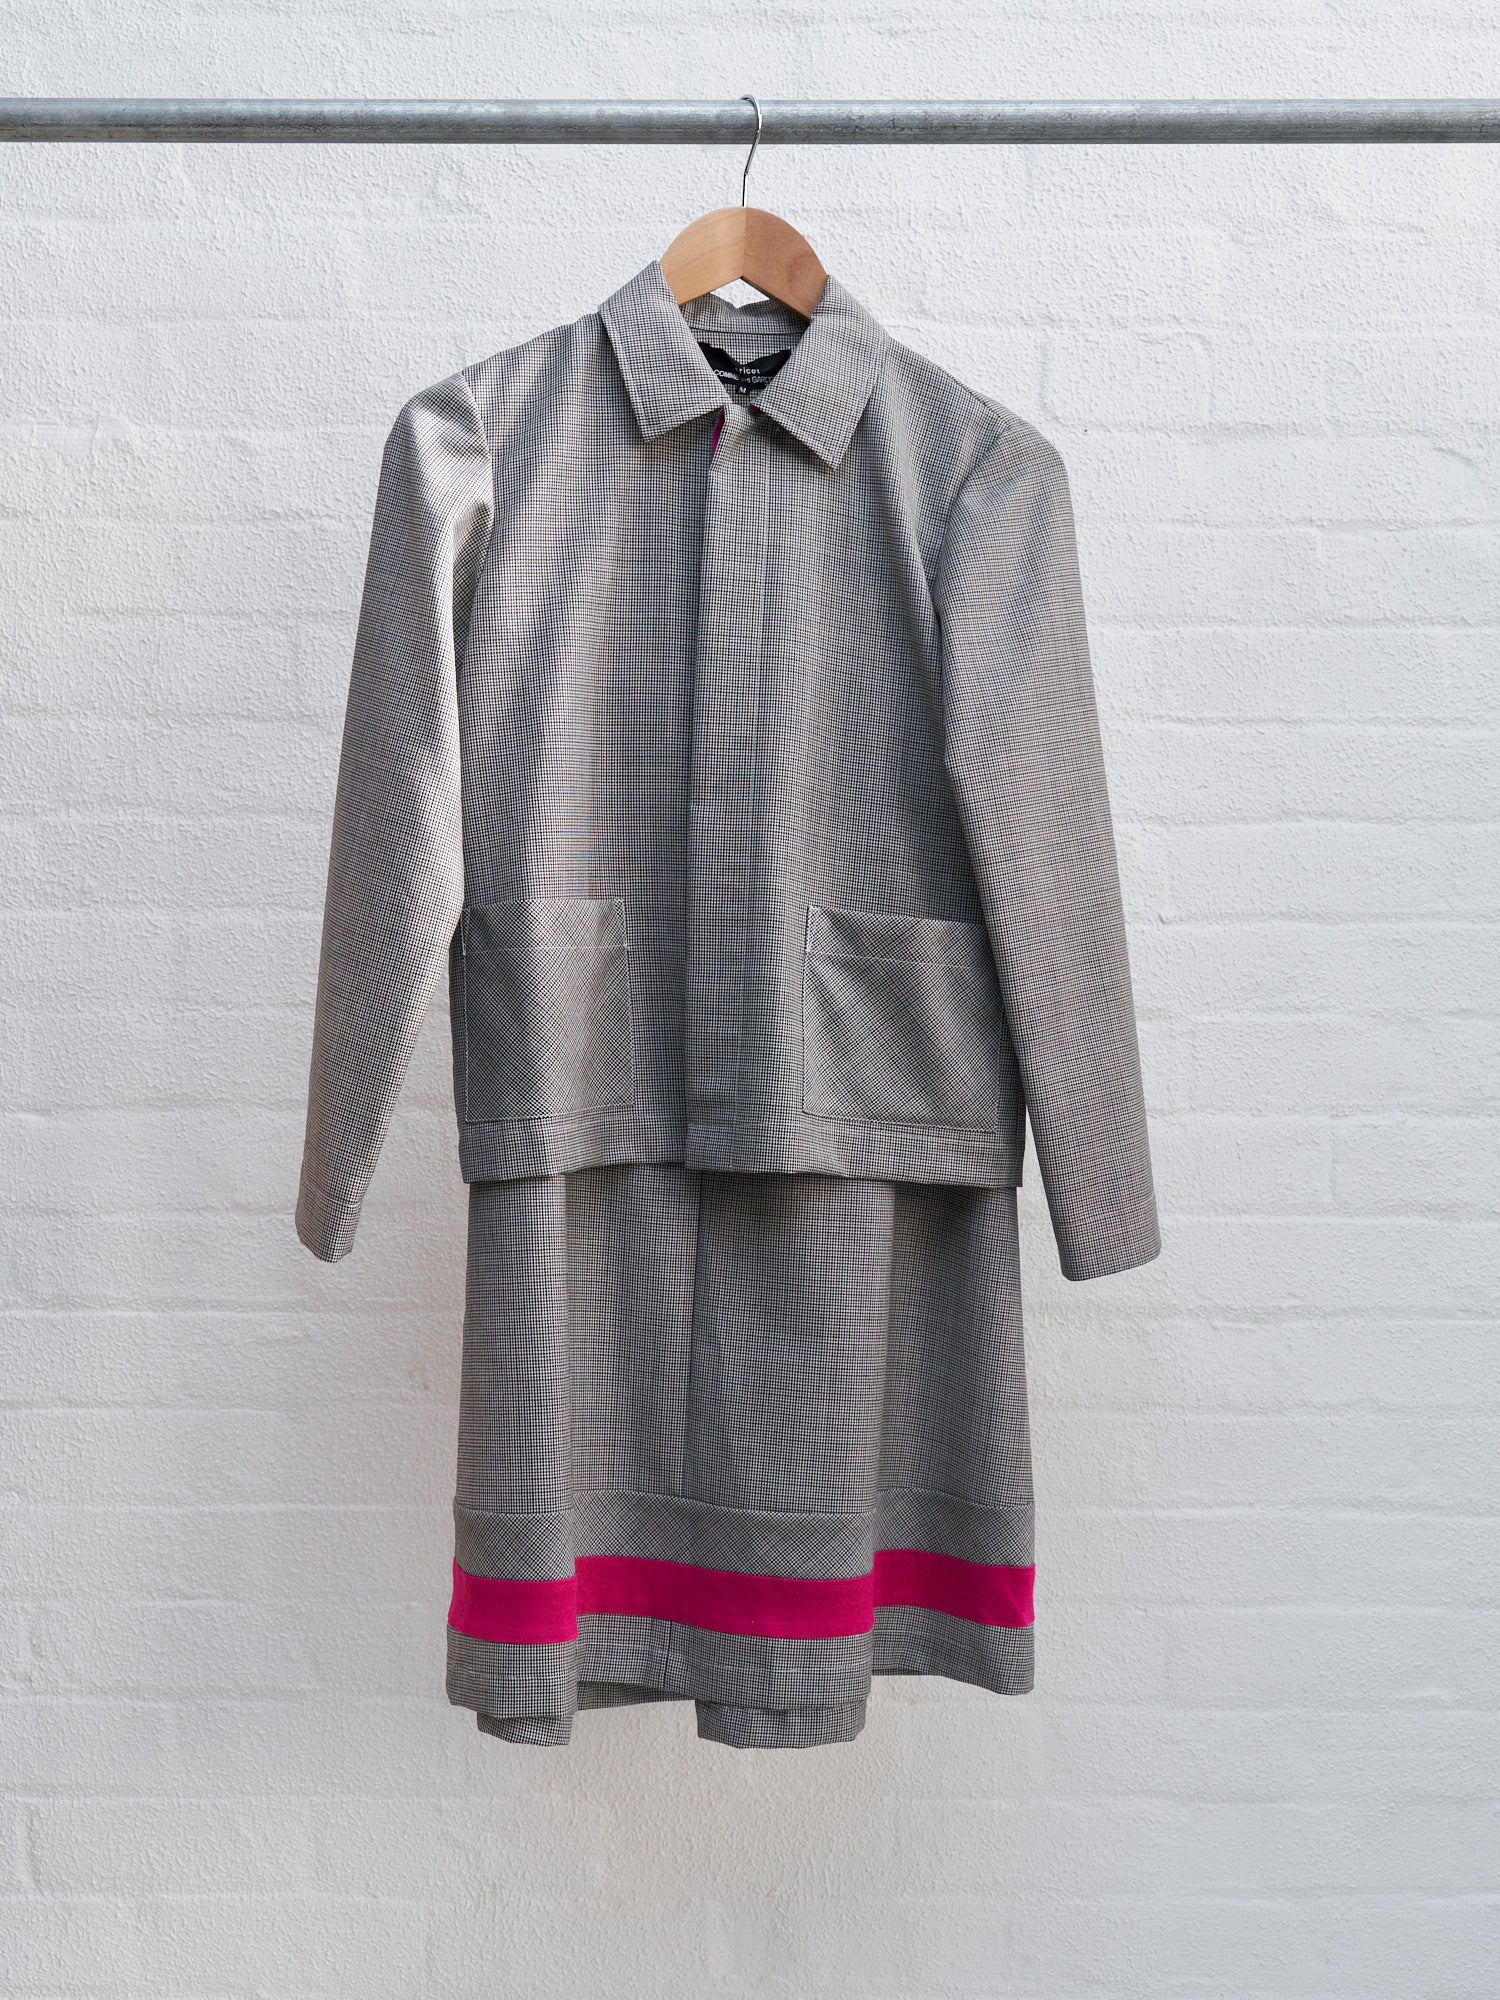 Tricot Comme des Garcons 2000 grey wool pink contrast skirt suit - womens M